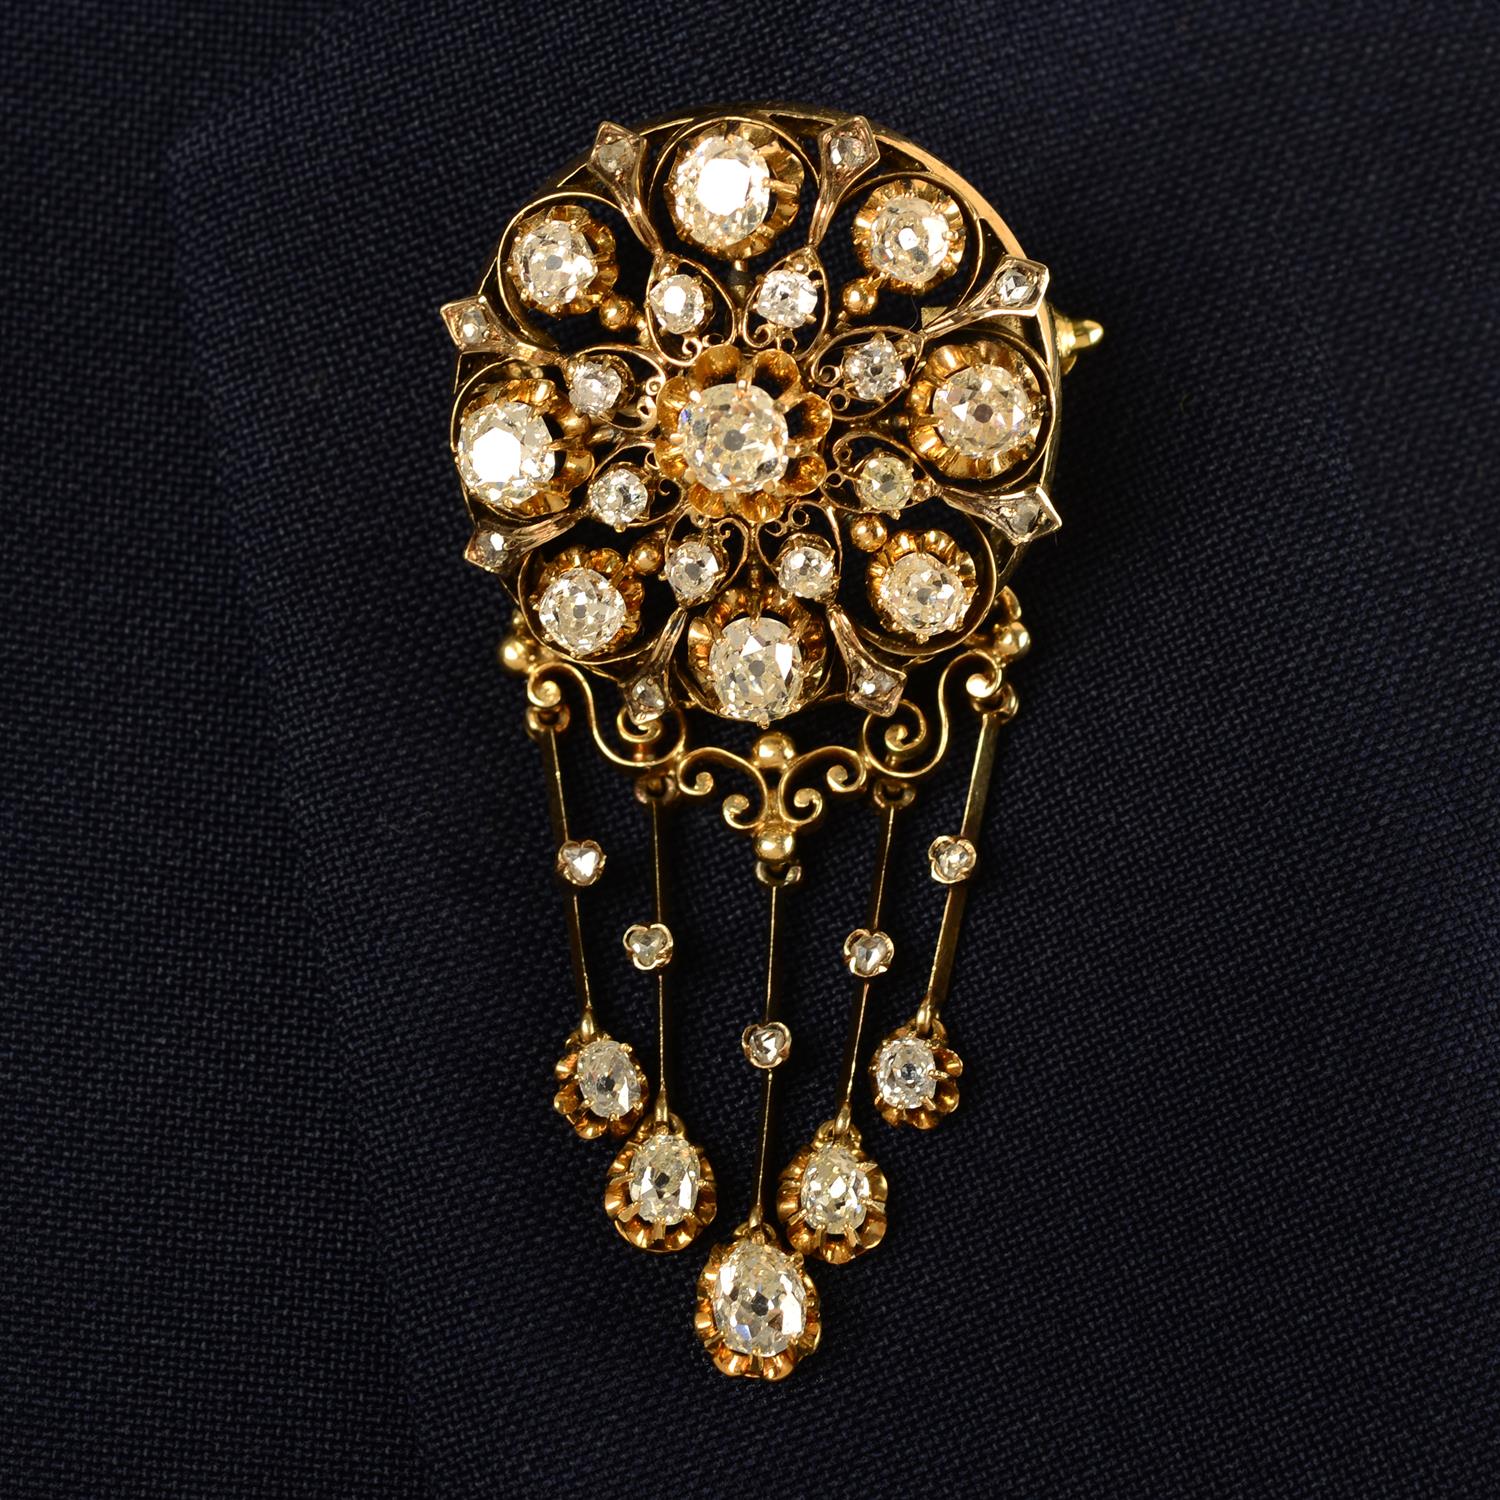 A late 19th century 18ct gold old-cut diamond fringe brooch/necklace.